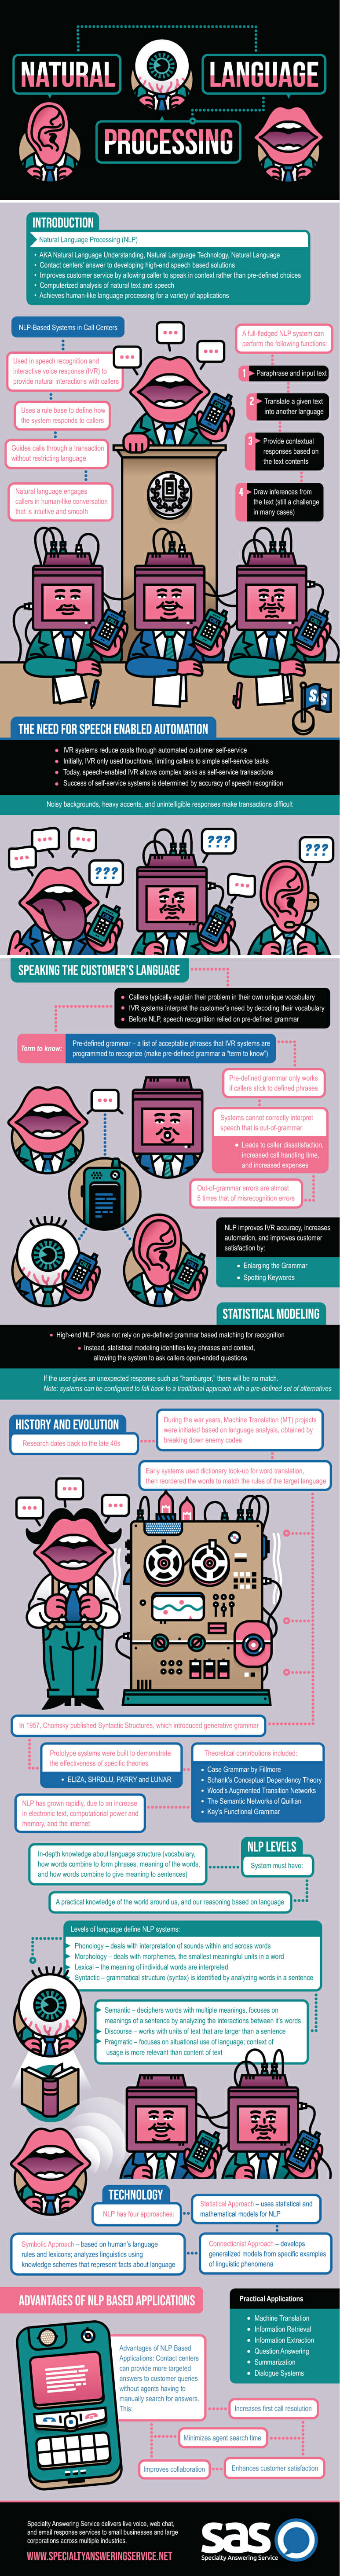 Learn About Natural Language Processing Infographic